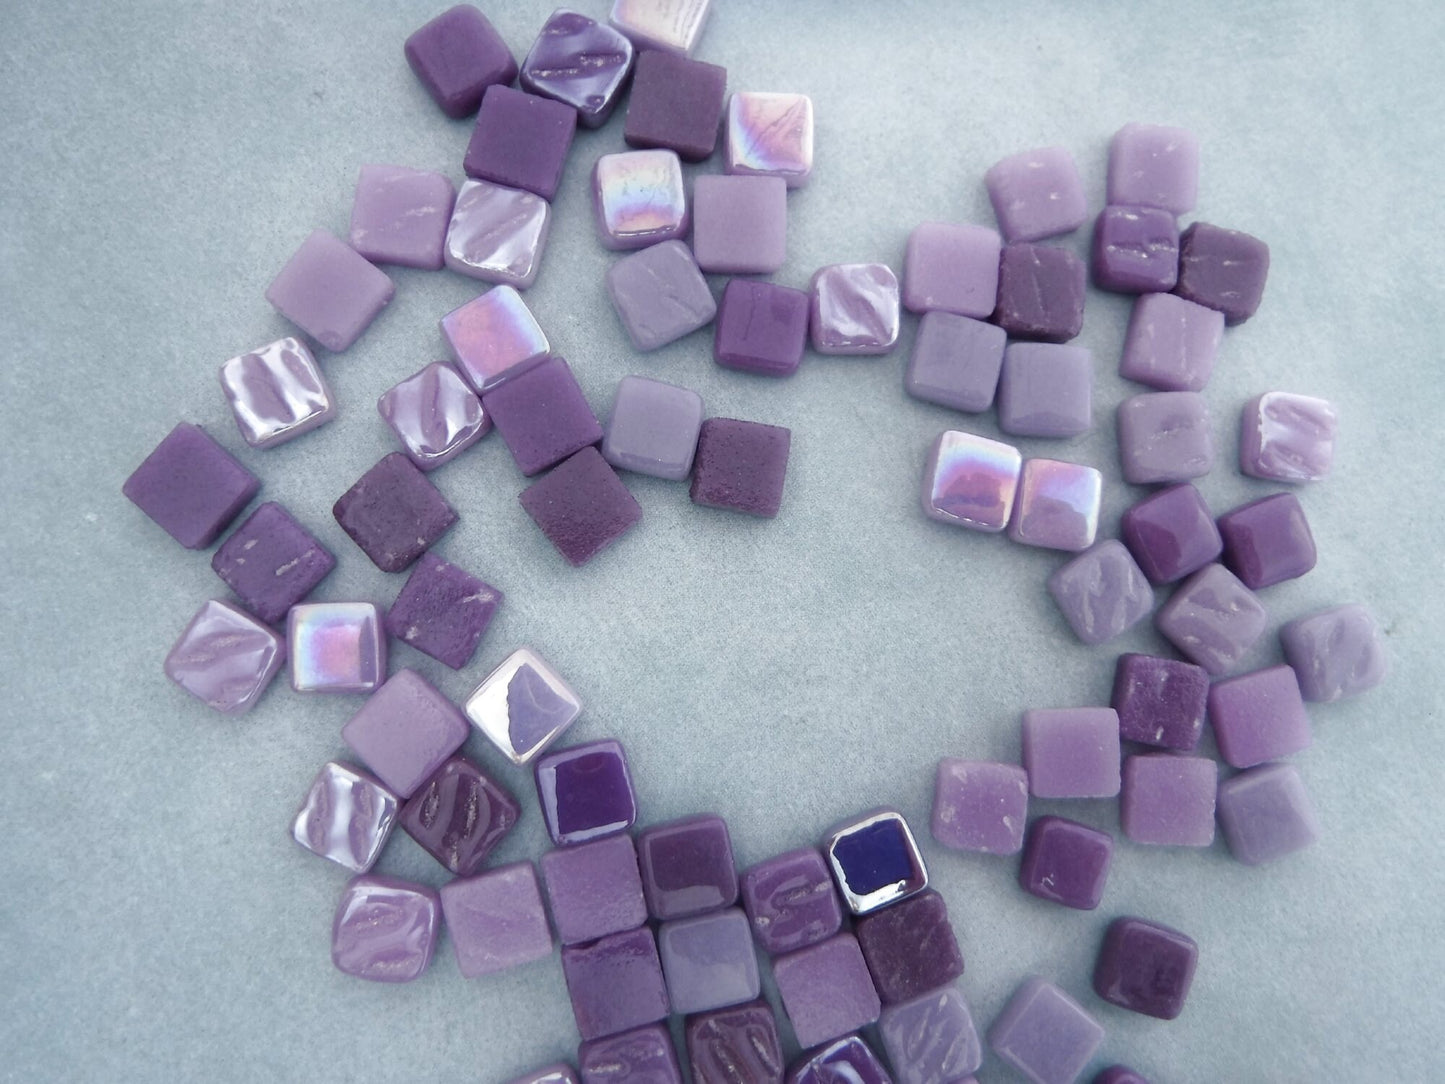 Plenty of Purple Mix Mini Glass Tiles - 8mm Square - 50 grams Opaque Glass Solid Color Mix of Violet Iridescent and Matte Tiles